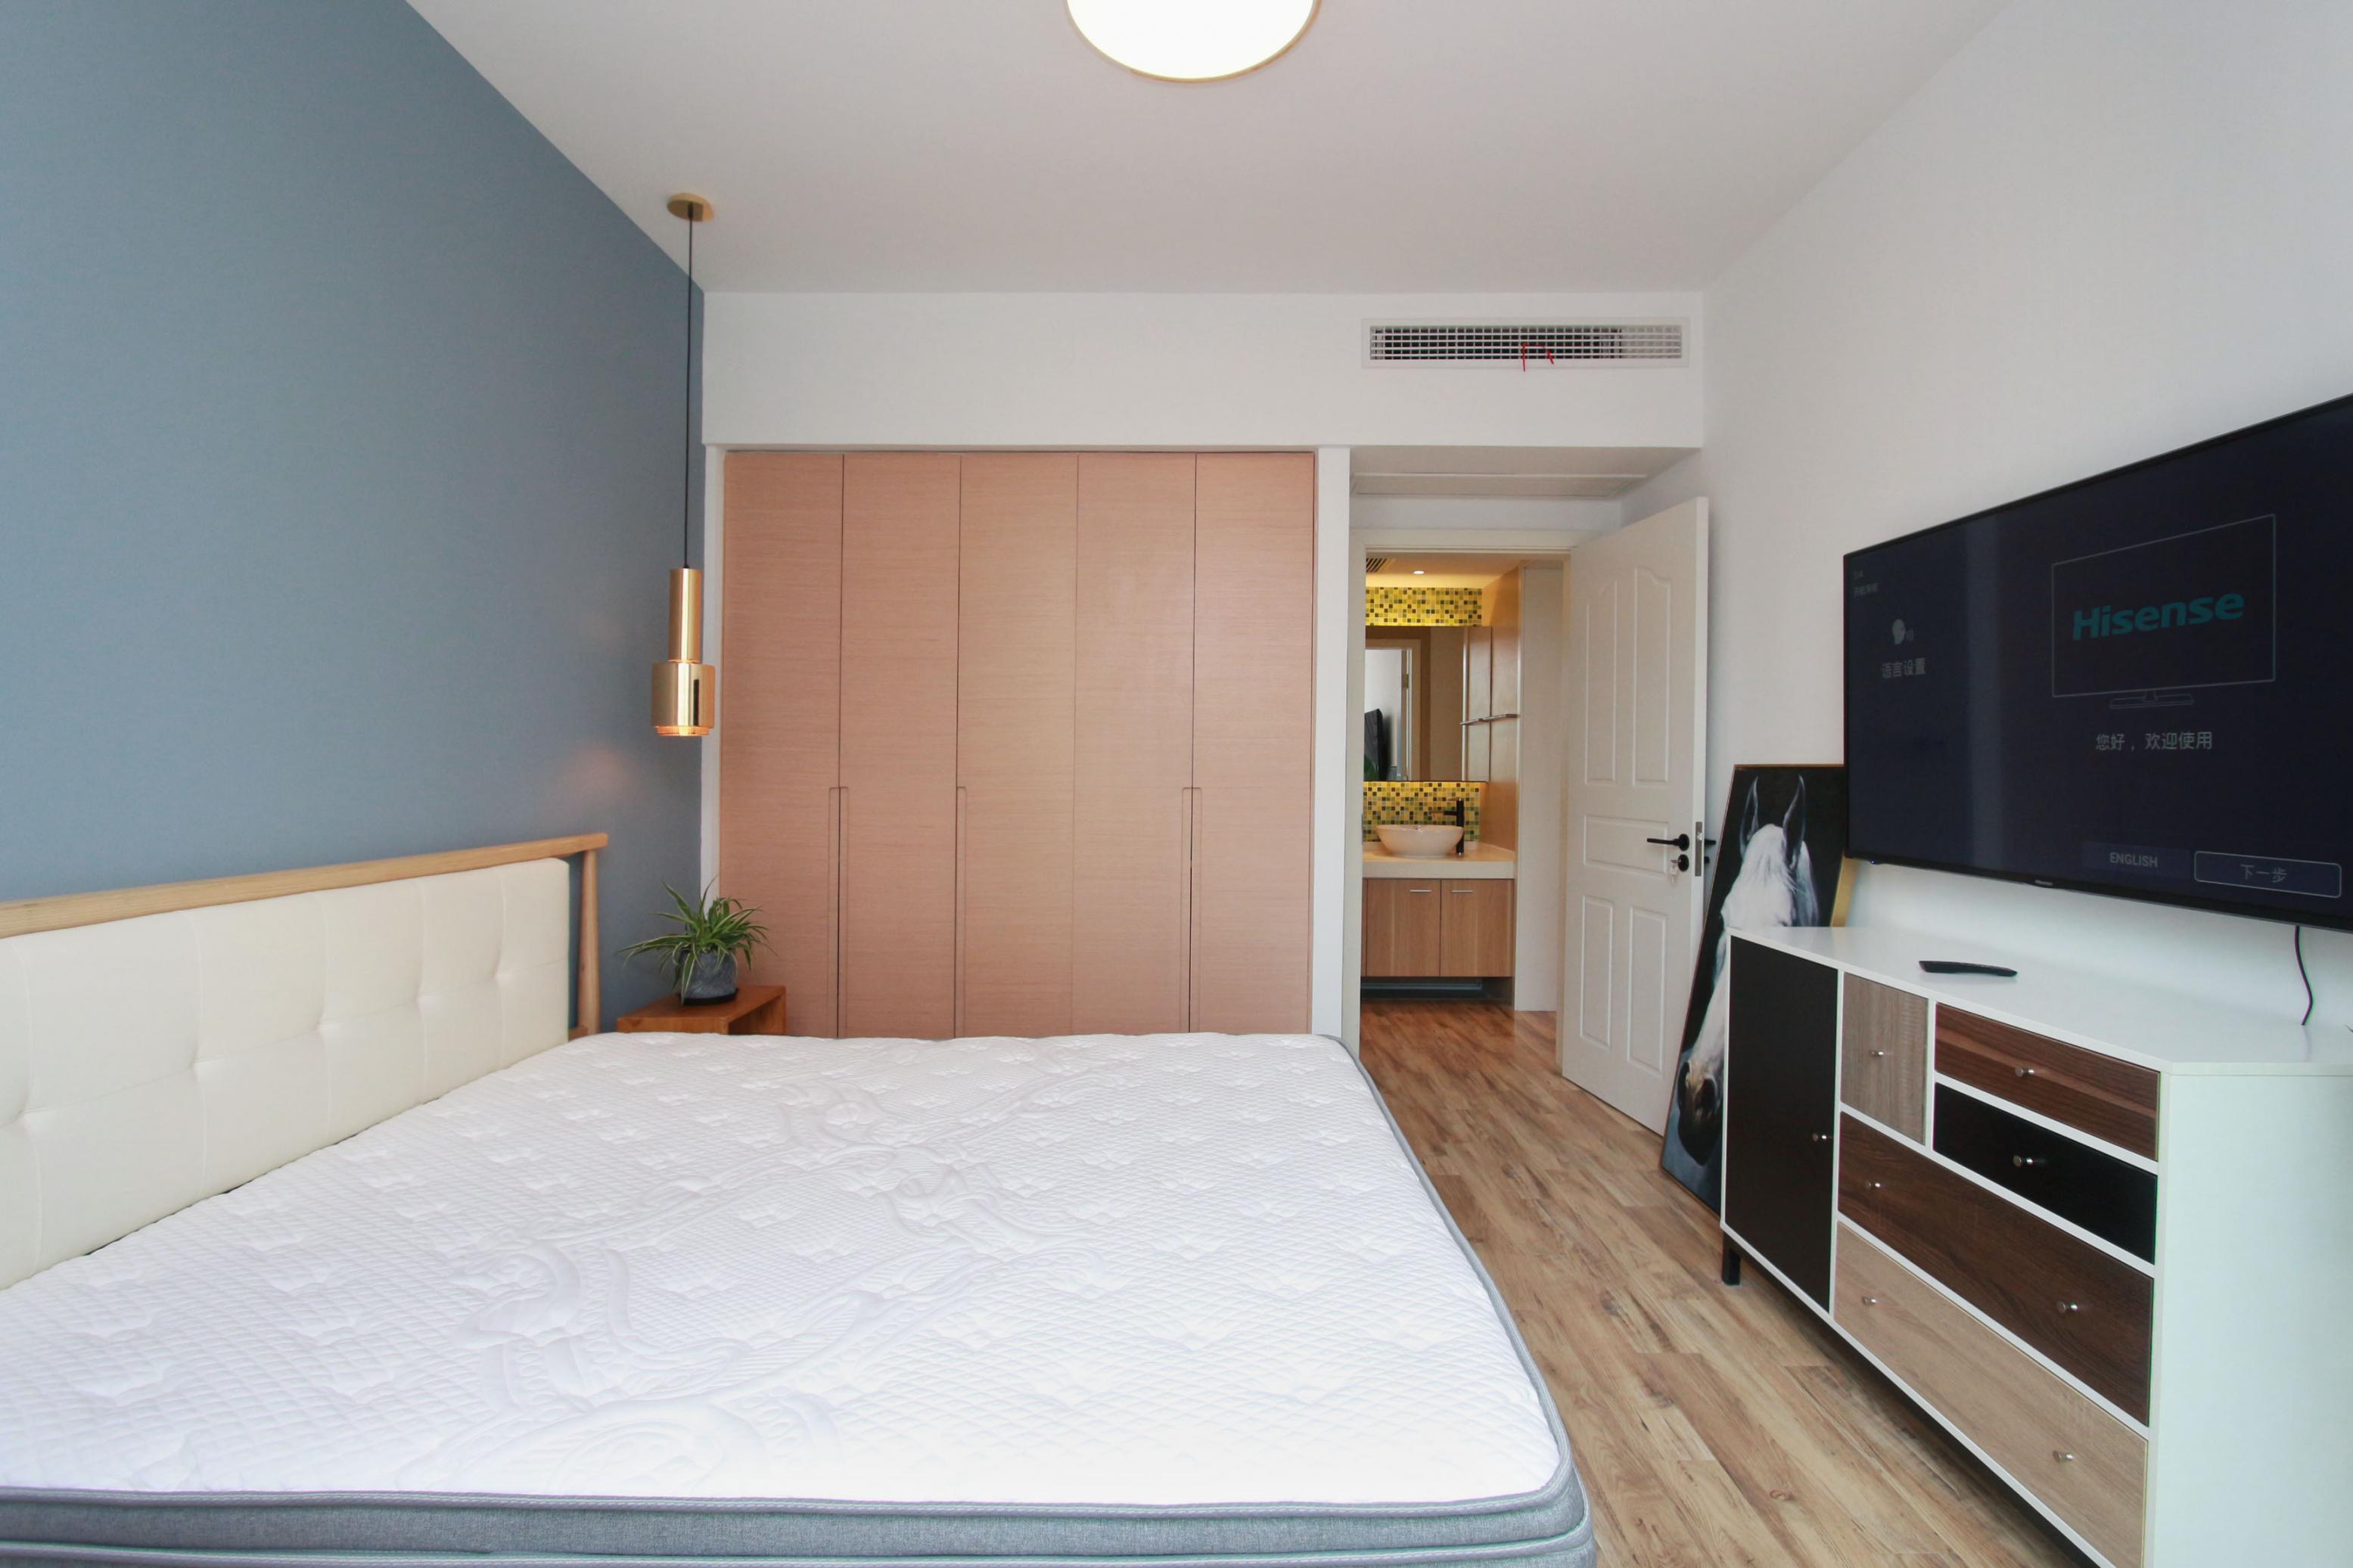 bedroom storage Renovated Modern High-end Ladoll 1BR Apt LN 2/12/13 for Rent in Shanghai